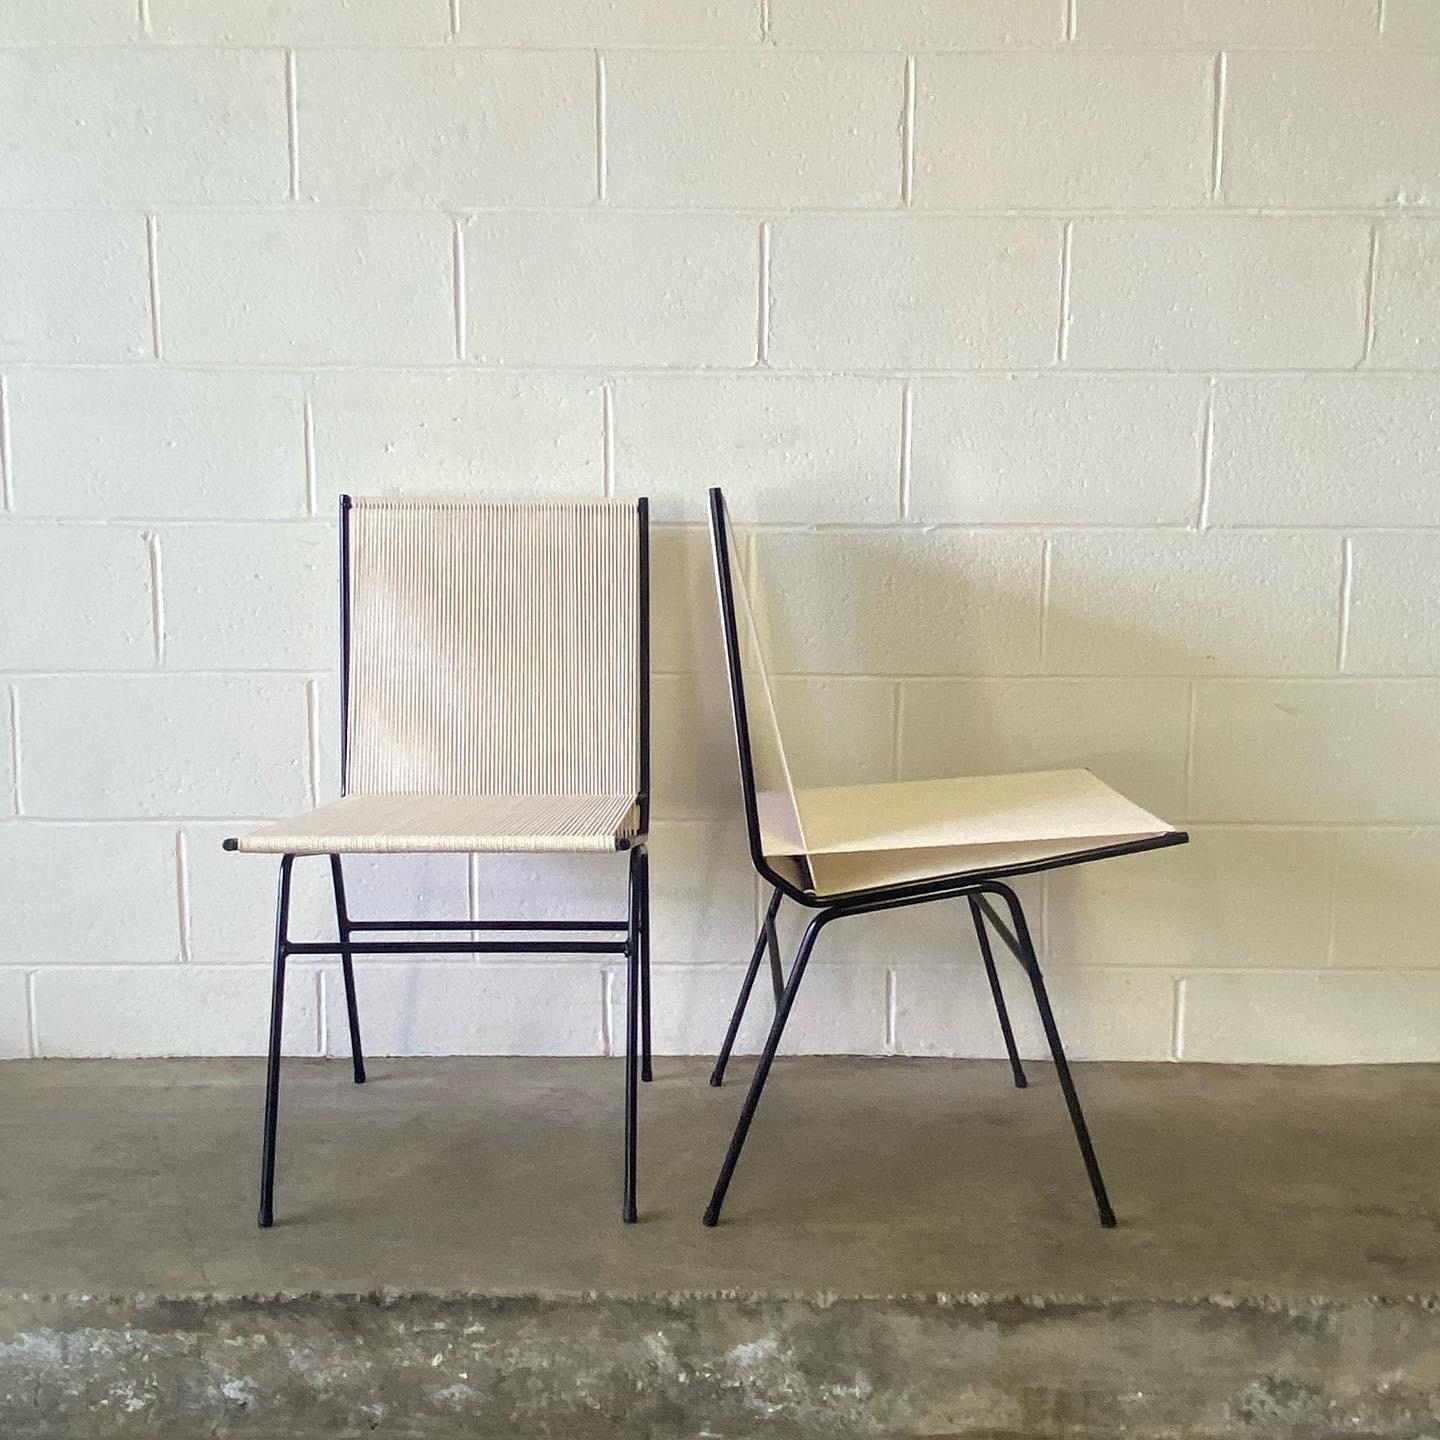 This is an excellent pair of iron and string chairs designed by Allan Gould for his Manhattan showroom in 1952.

Shipping: Please request a shipping quote. I can generally do better than the listed quote. 